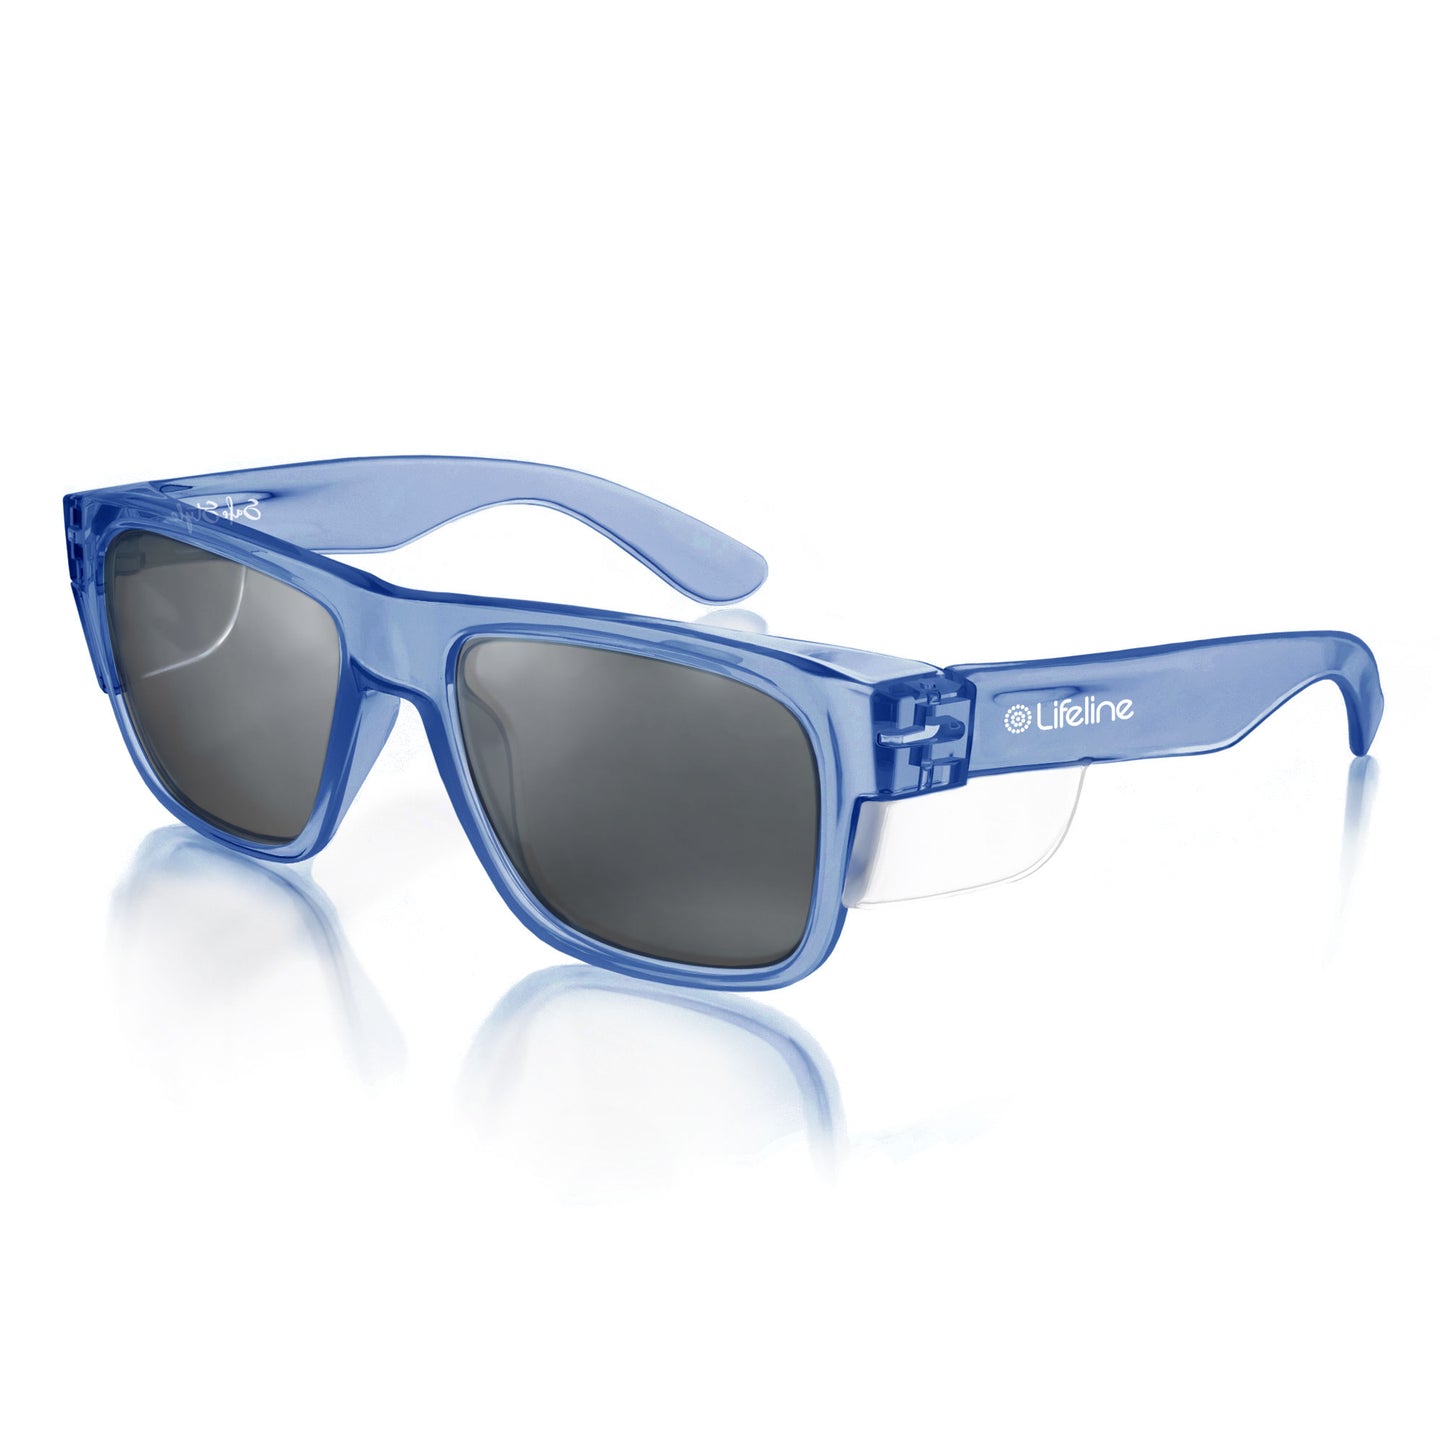 SafeStyle Fusions Blue Frame /Tinted UV400